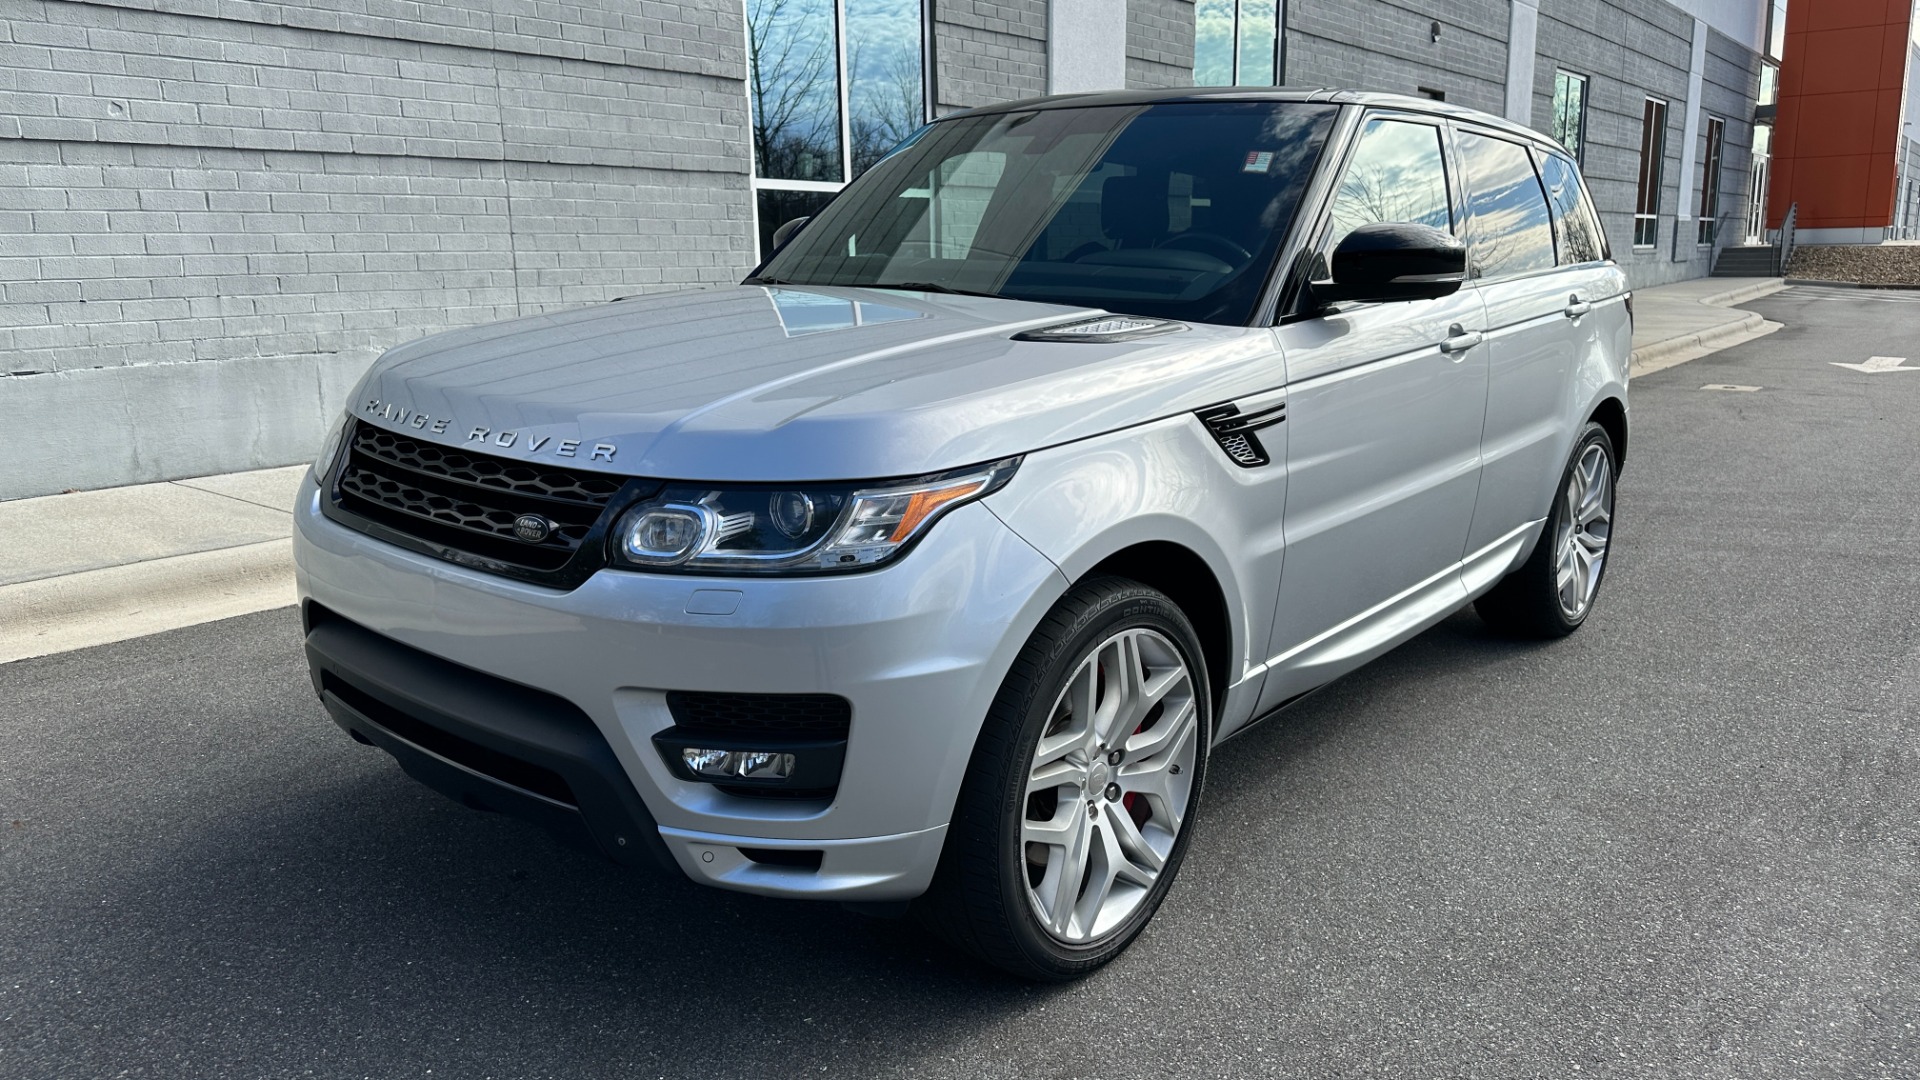 Used 2014 Land Rover Range Rover Sport Autobiography for sale $36,999 at Formula Imports in Charlotte NC 28227 2